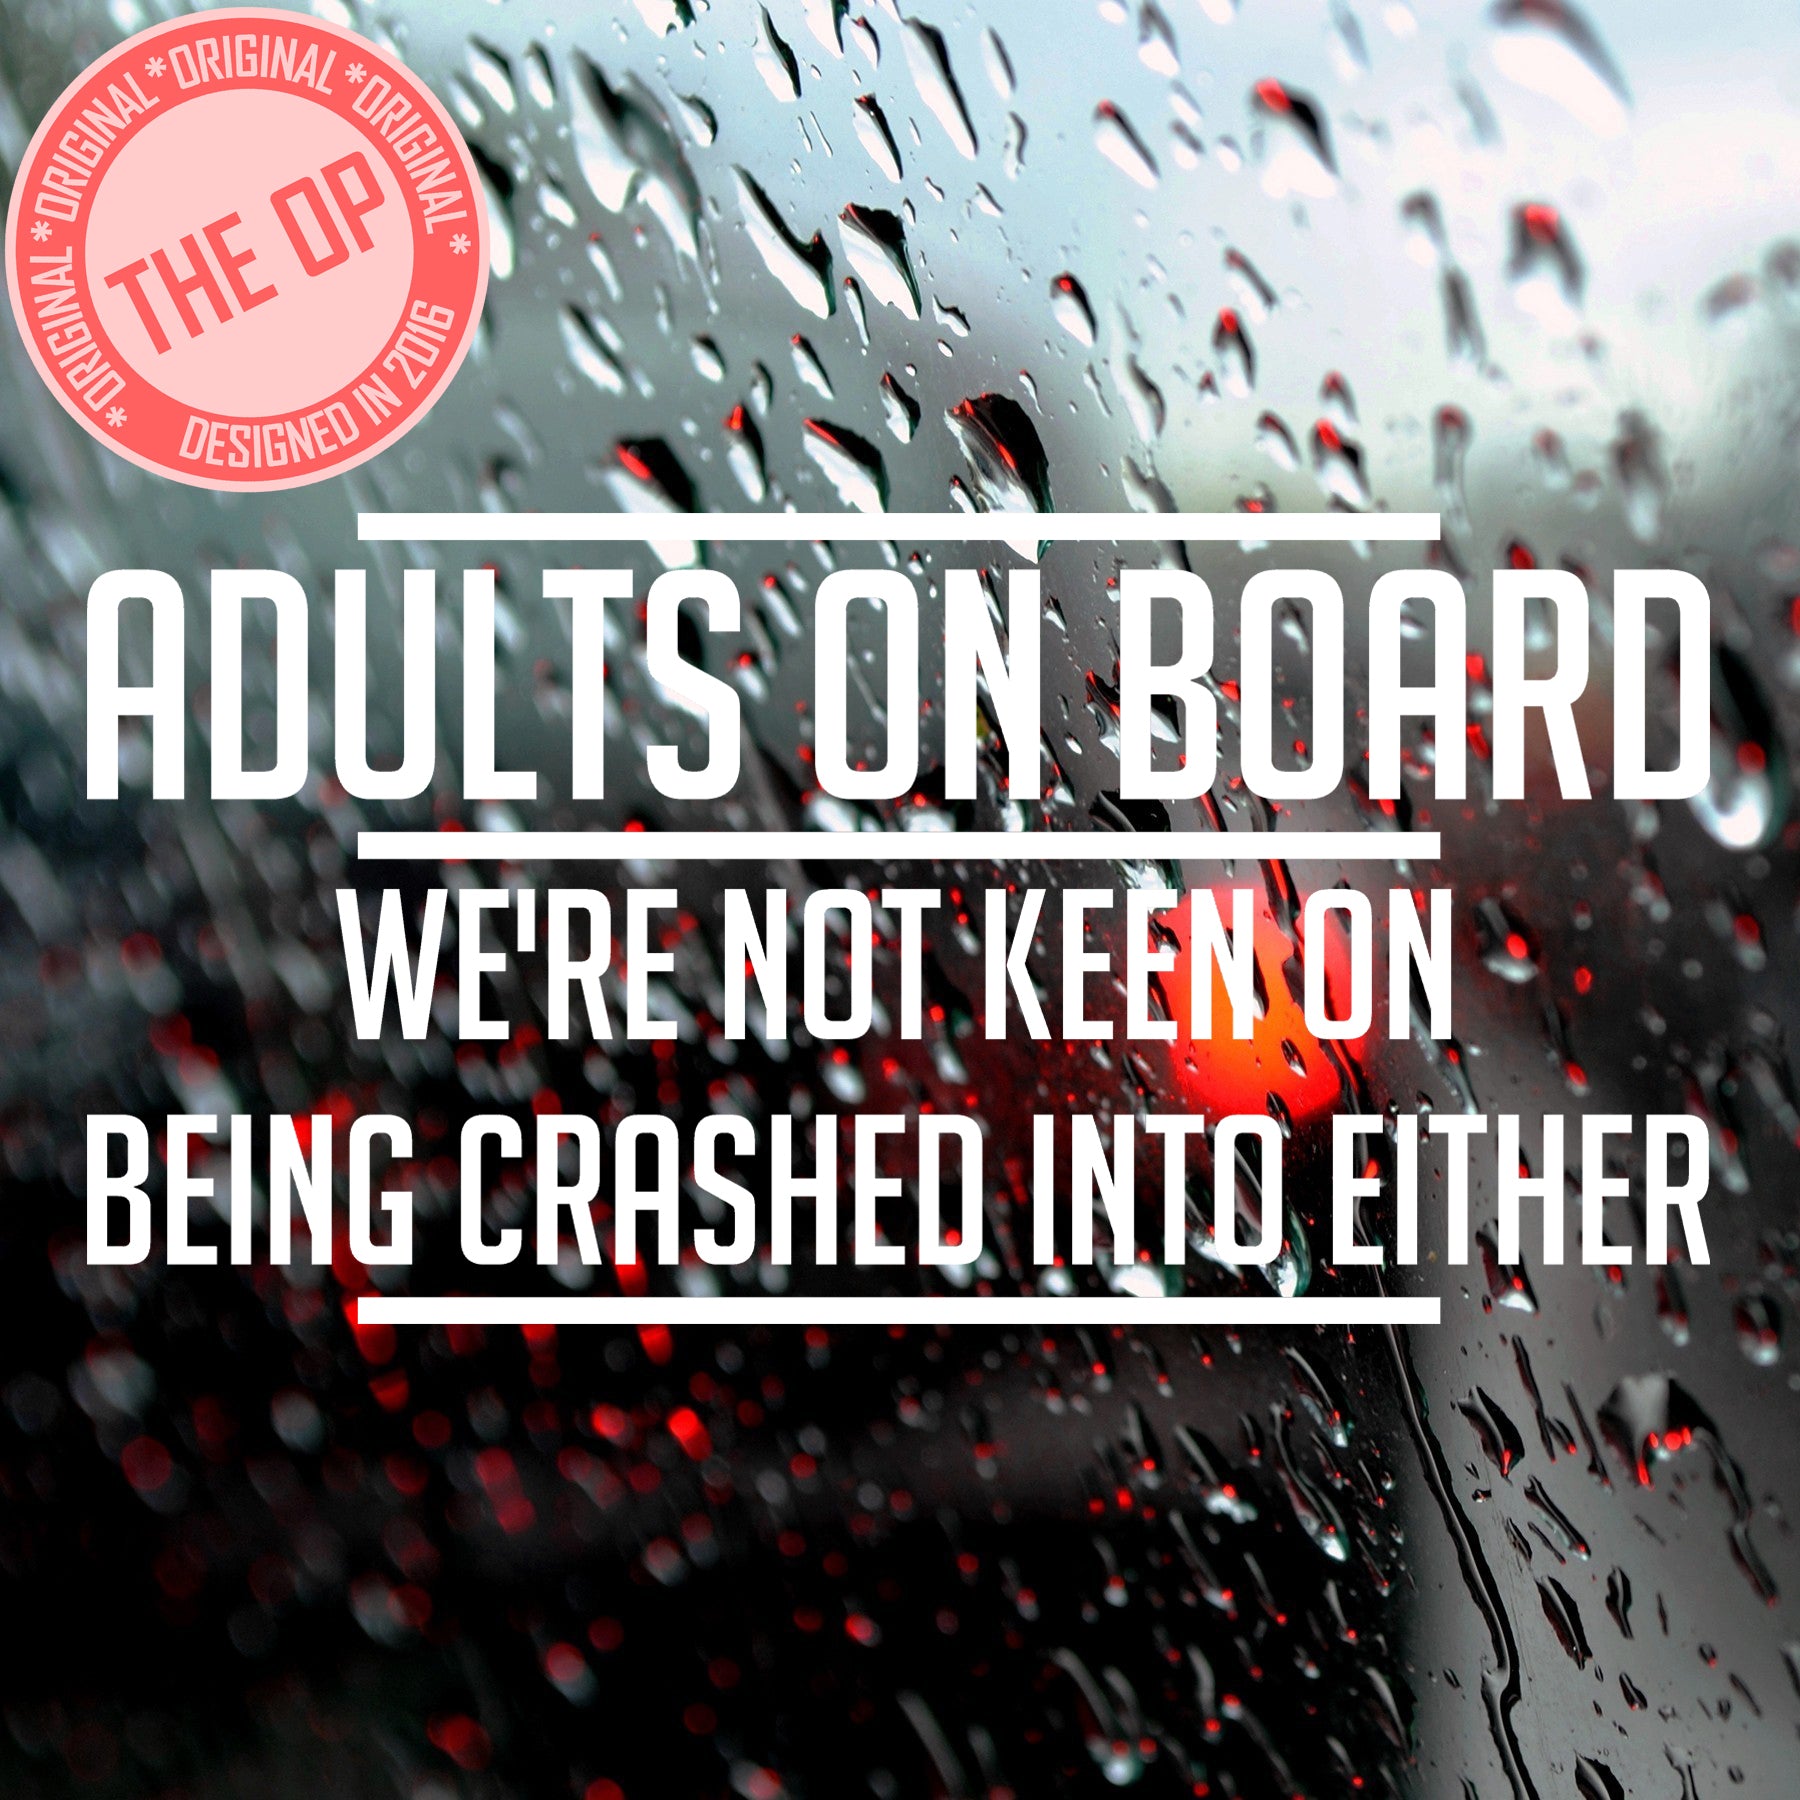 Image shows The Original "Adults On Board" Bumper sticker on a rainy window background. 